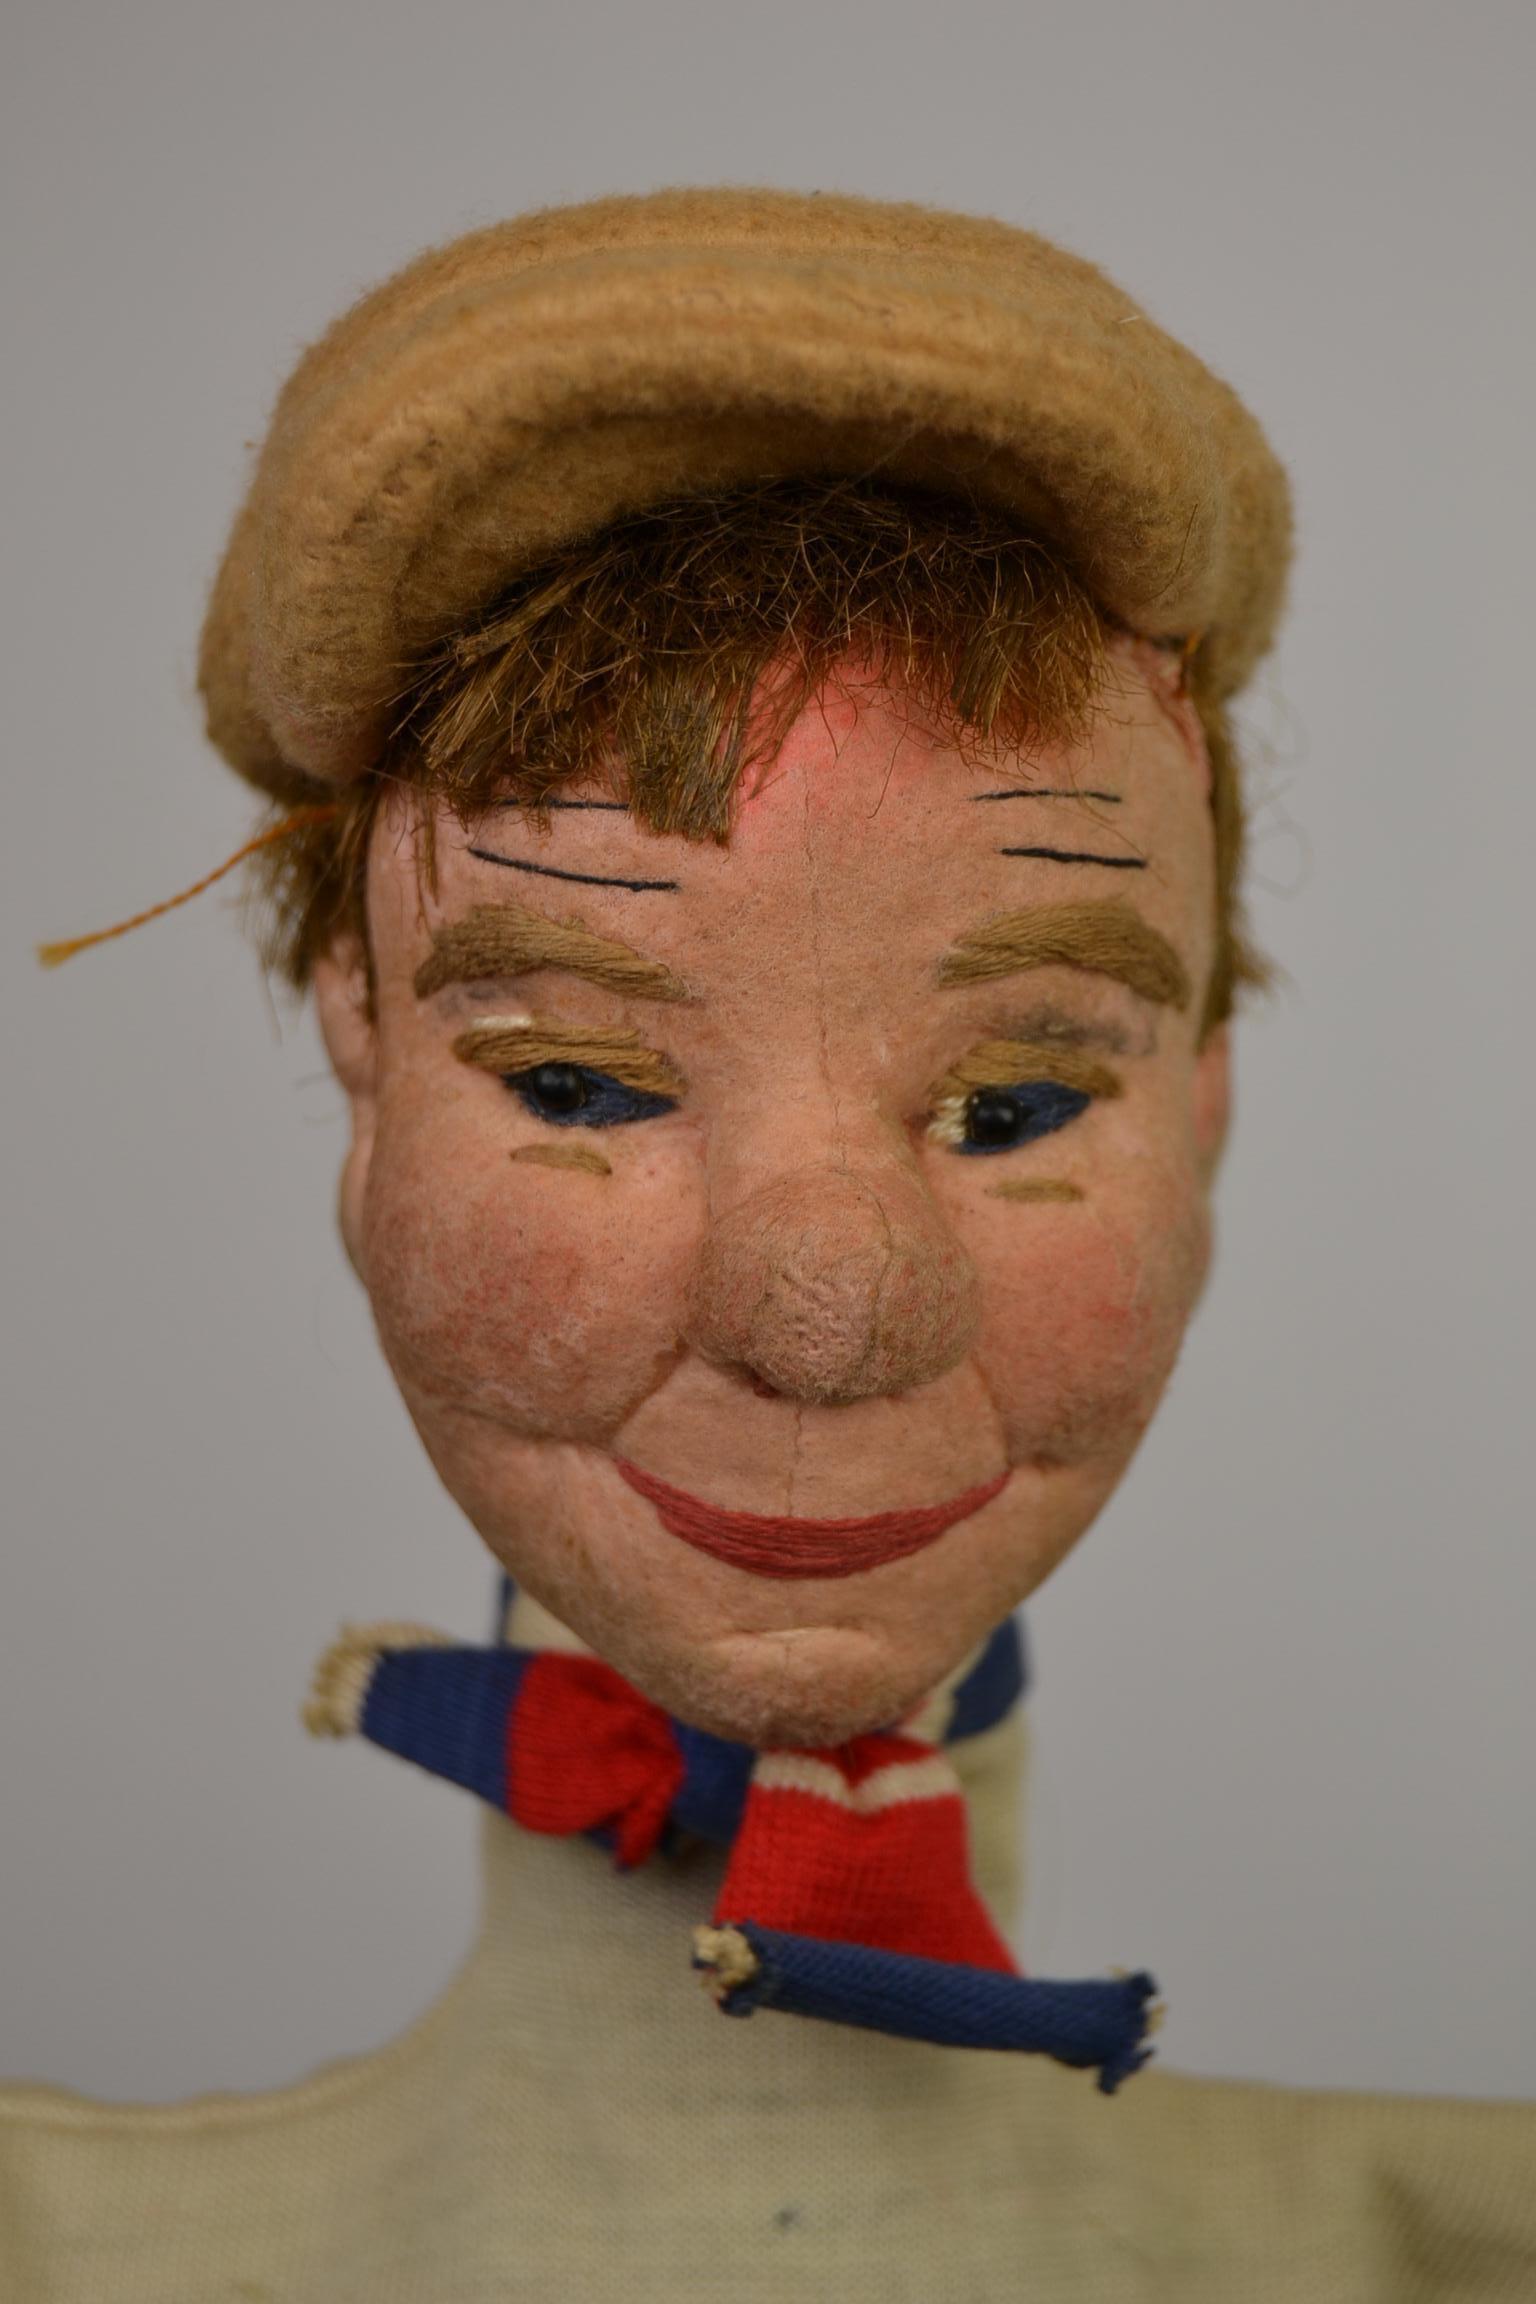 Cute looking 1950s hand puppet dolls.
These handmade Marionette dolls have very detailed stitched features.
A man with a cap and a scarf and the women with a shawl and
braids and tears of hapiness. The heads are made of felt and the clothes from